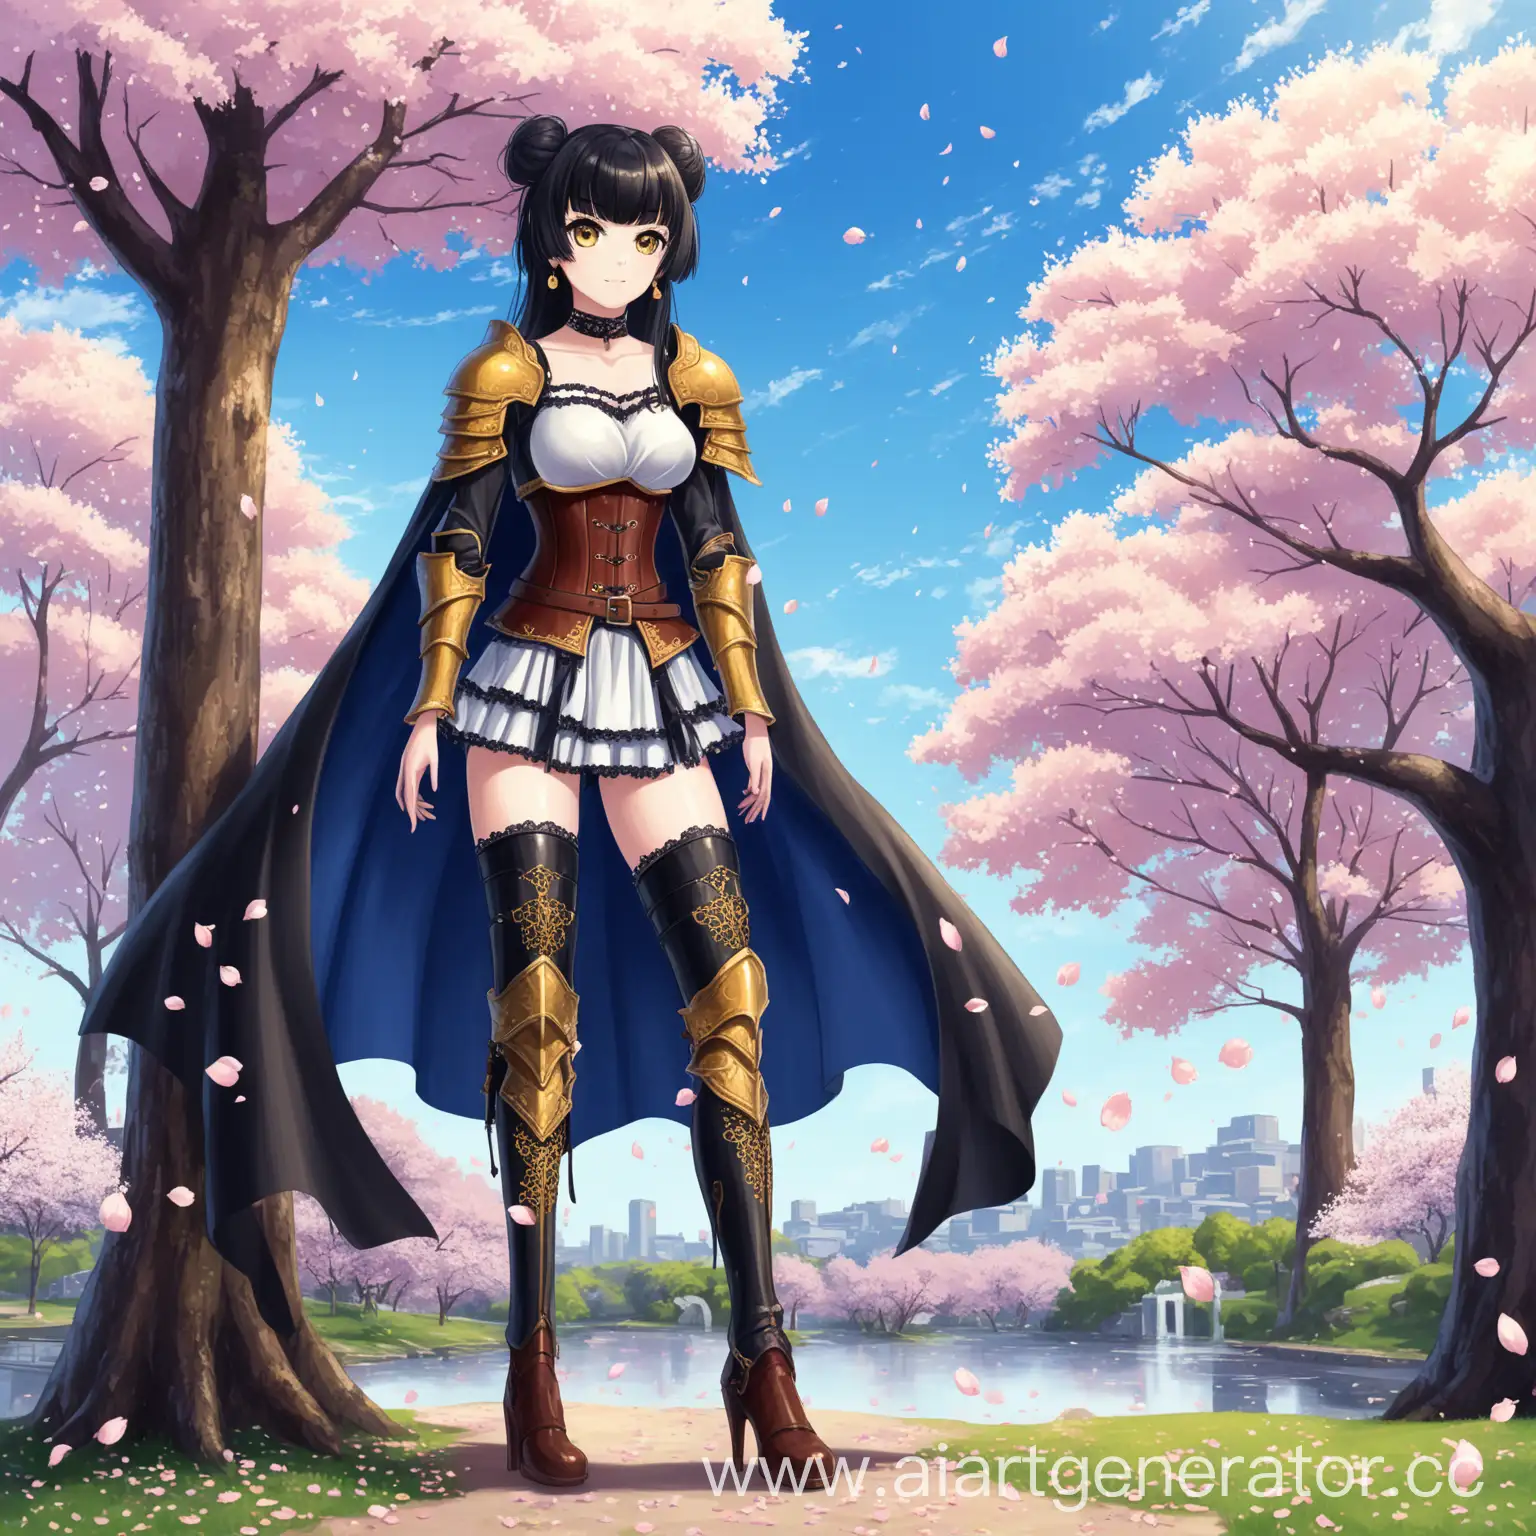 Warrior-Woman-in-Armor-with-Cherry-Blossoms